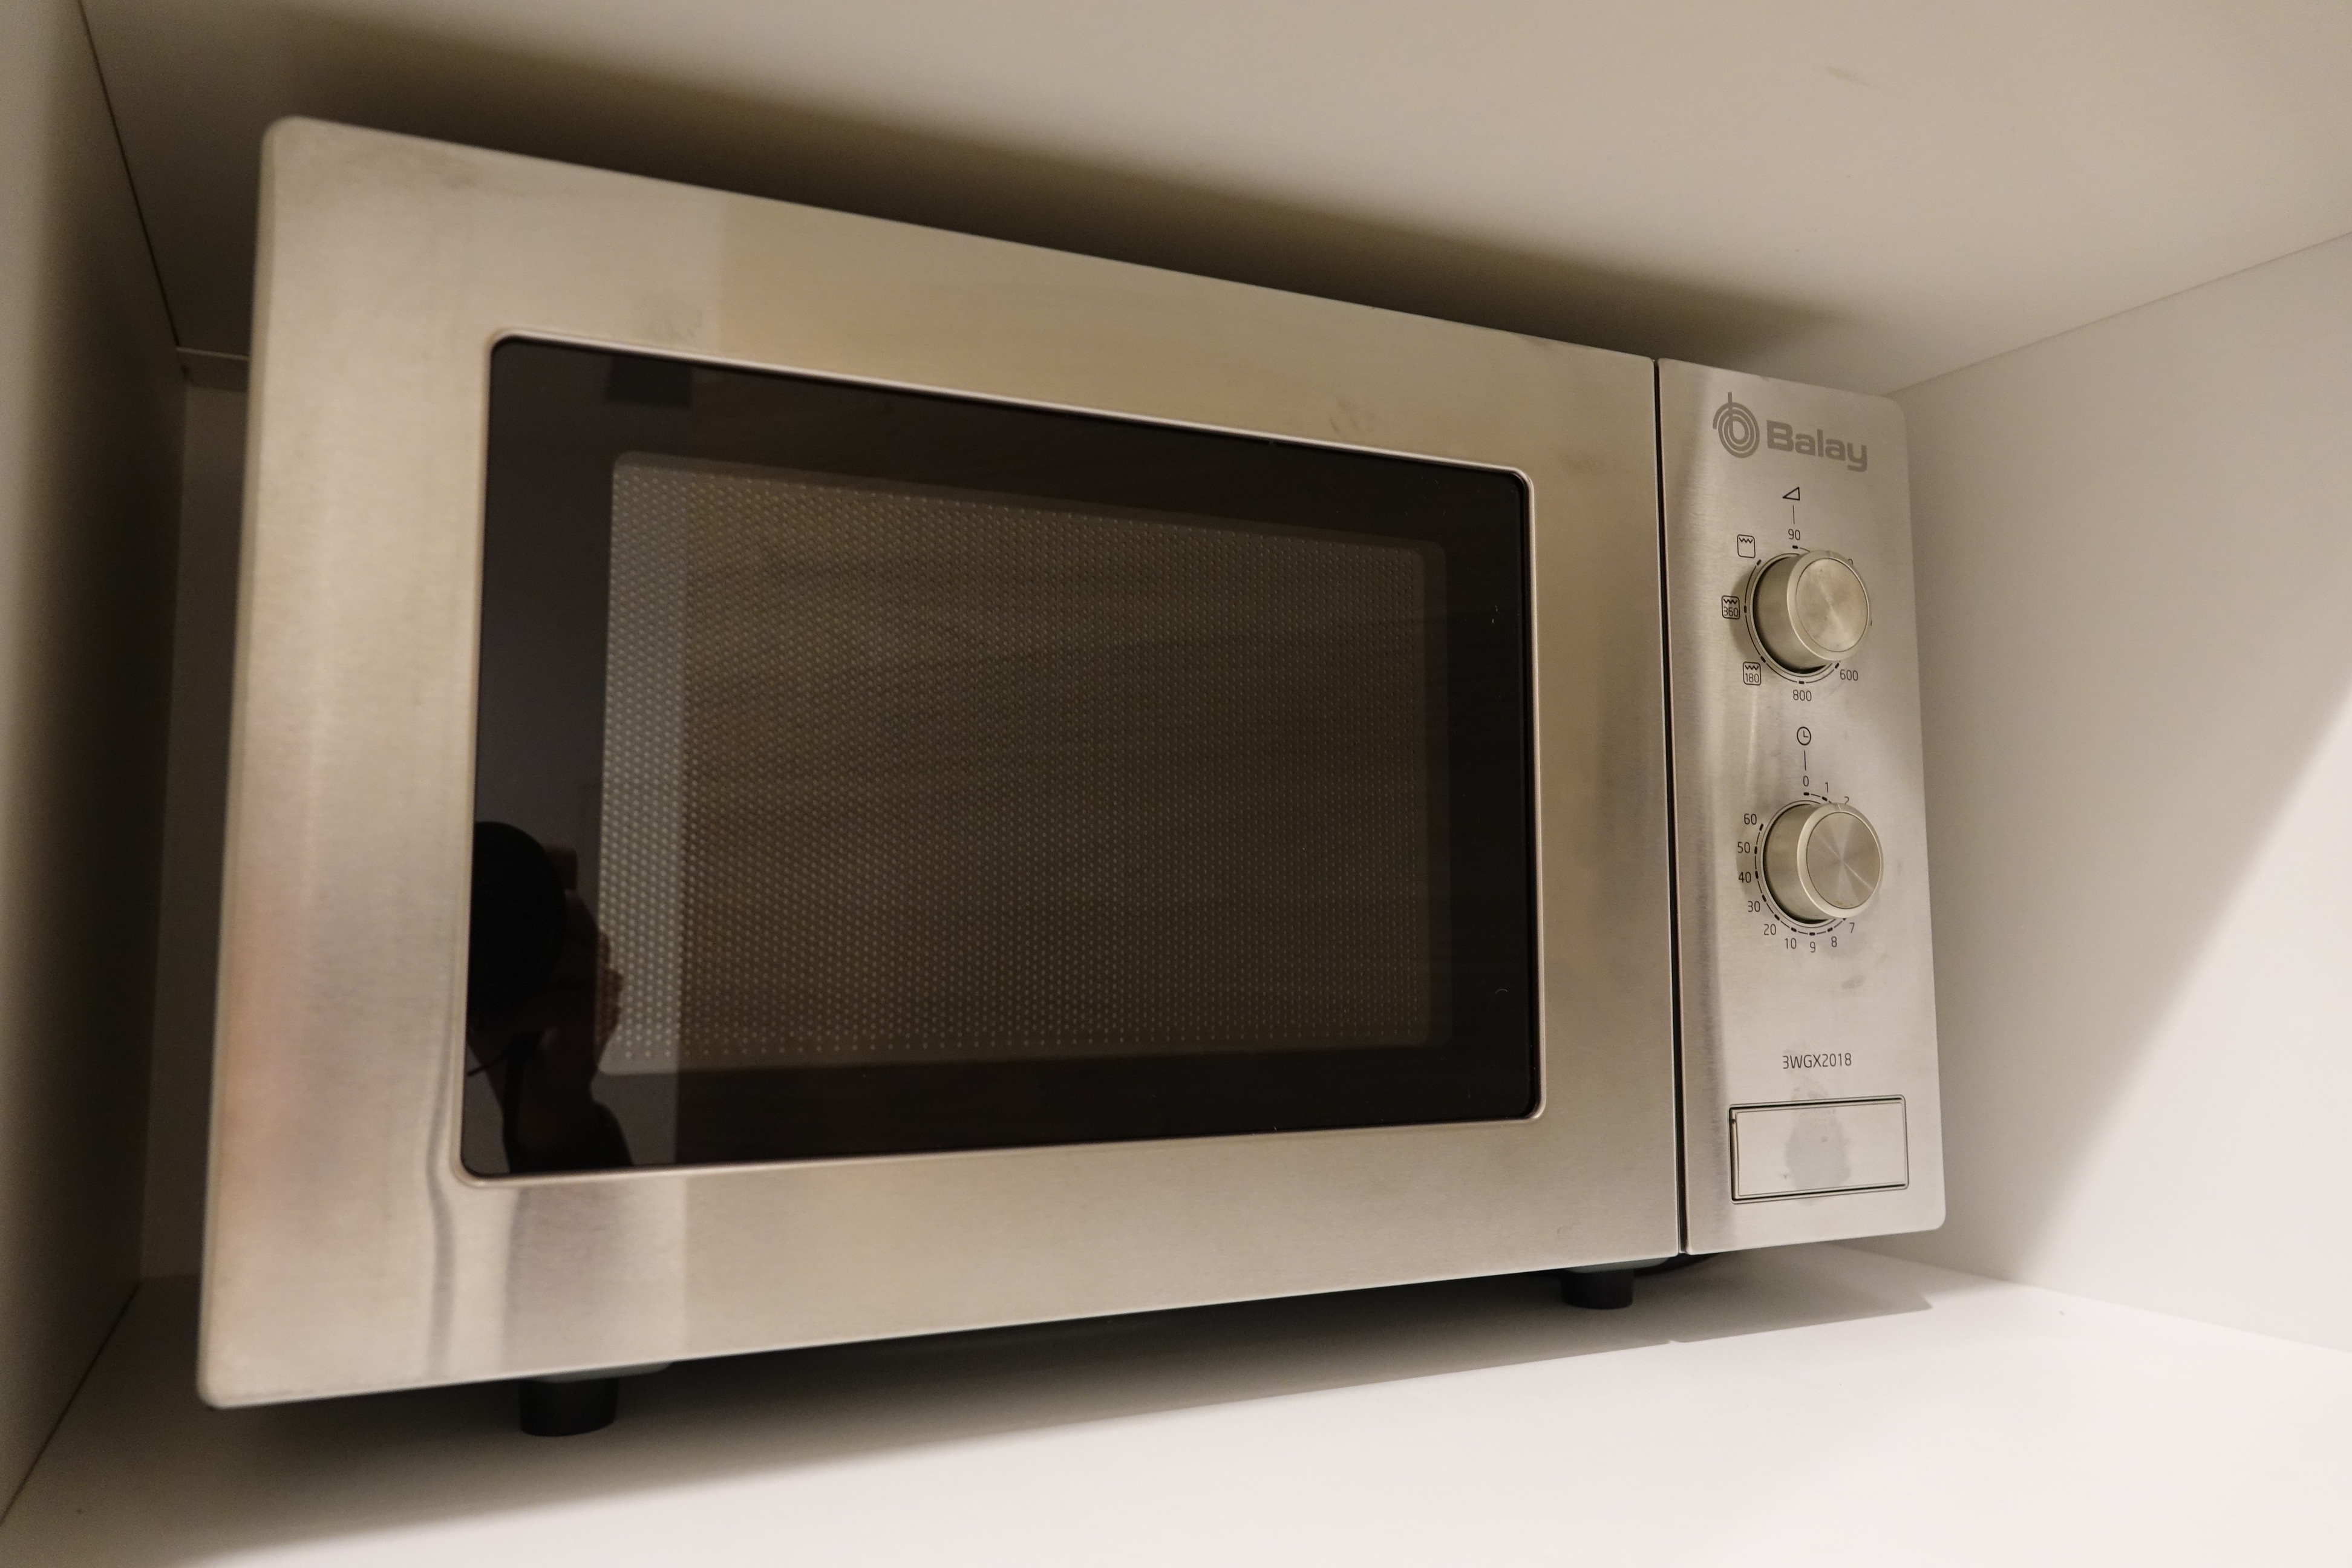 a silver microwave oven with knobs